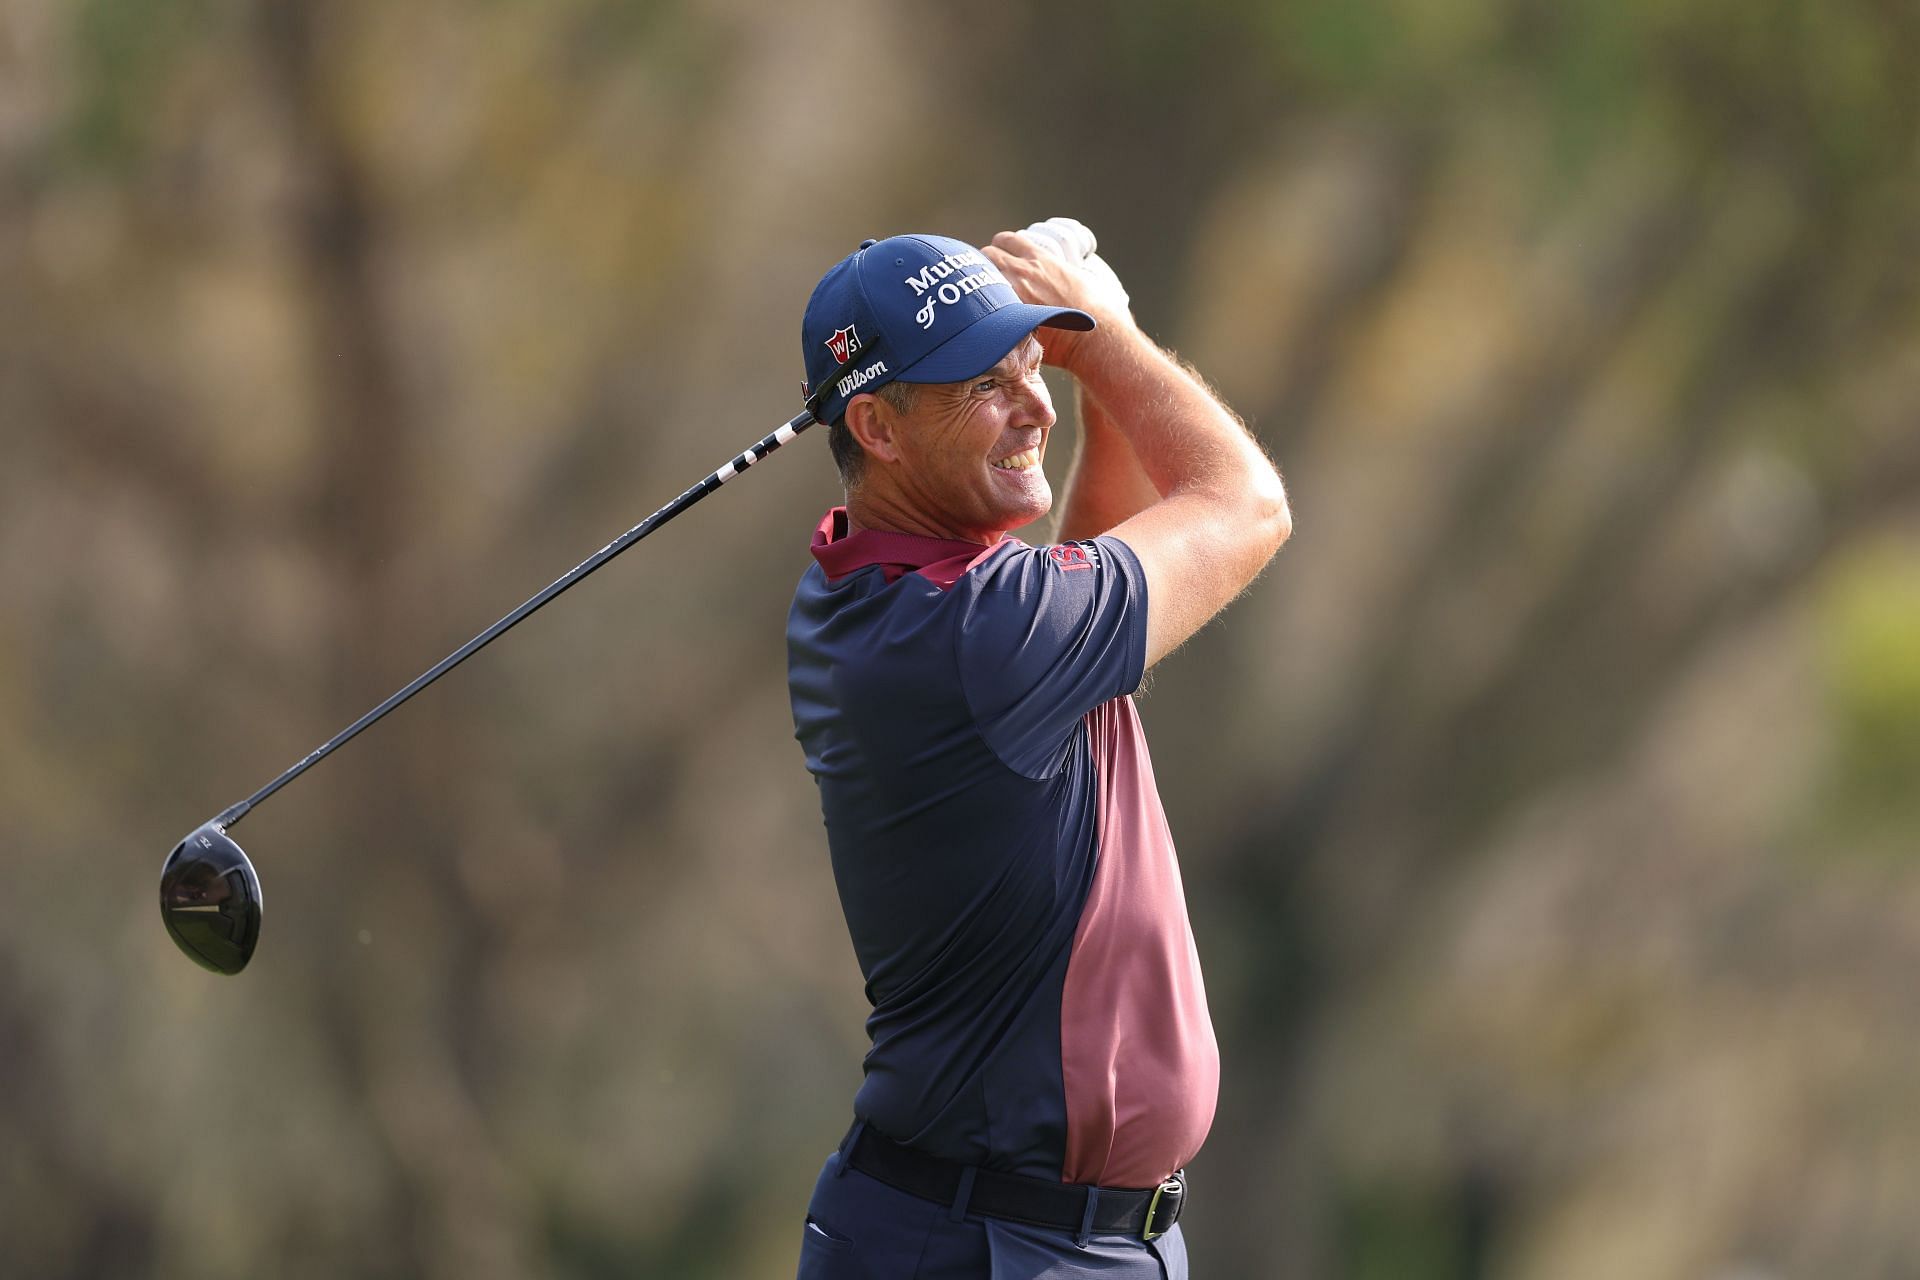 Padraig Harrington recently competed at the Arnold Palmer Invitational